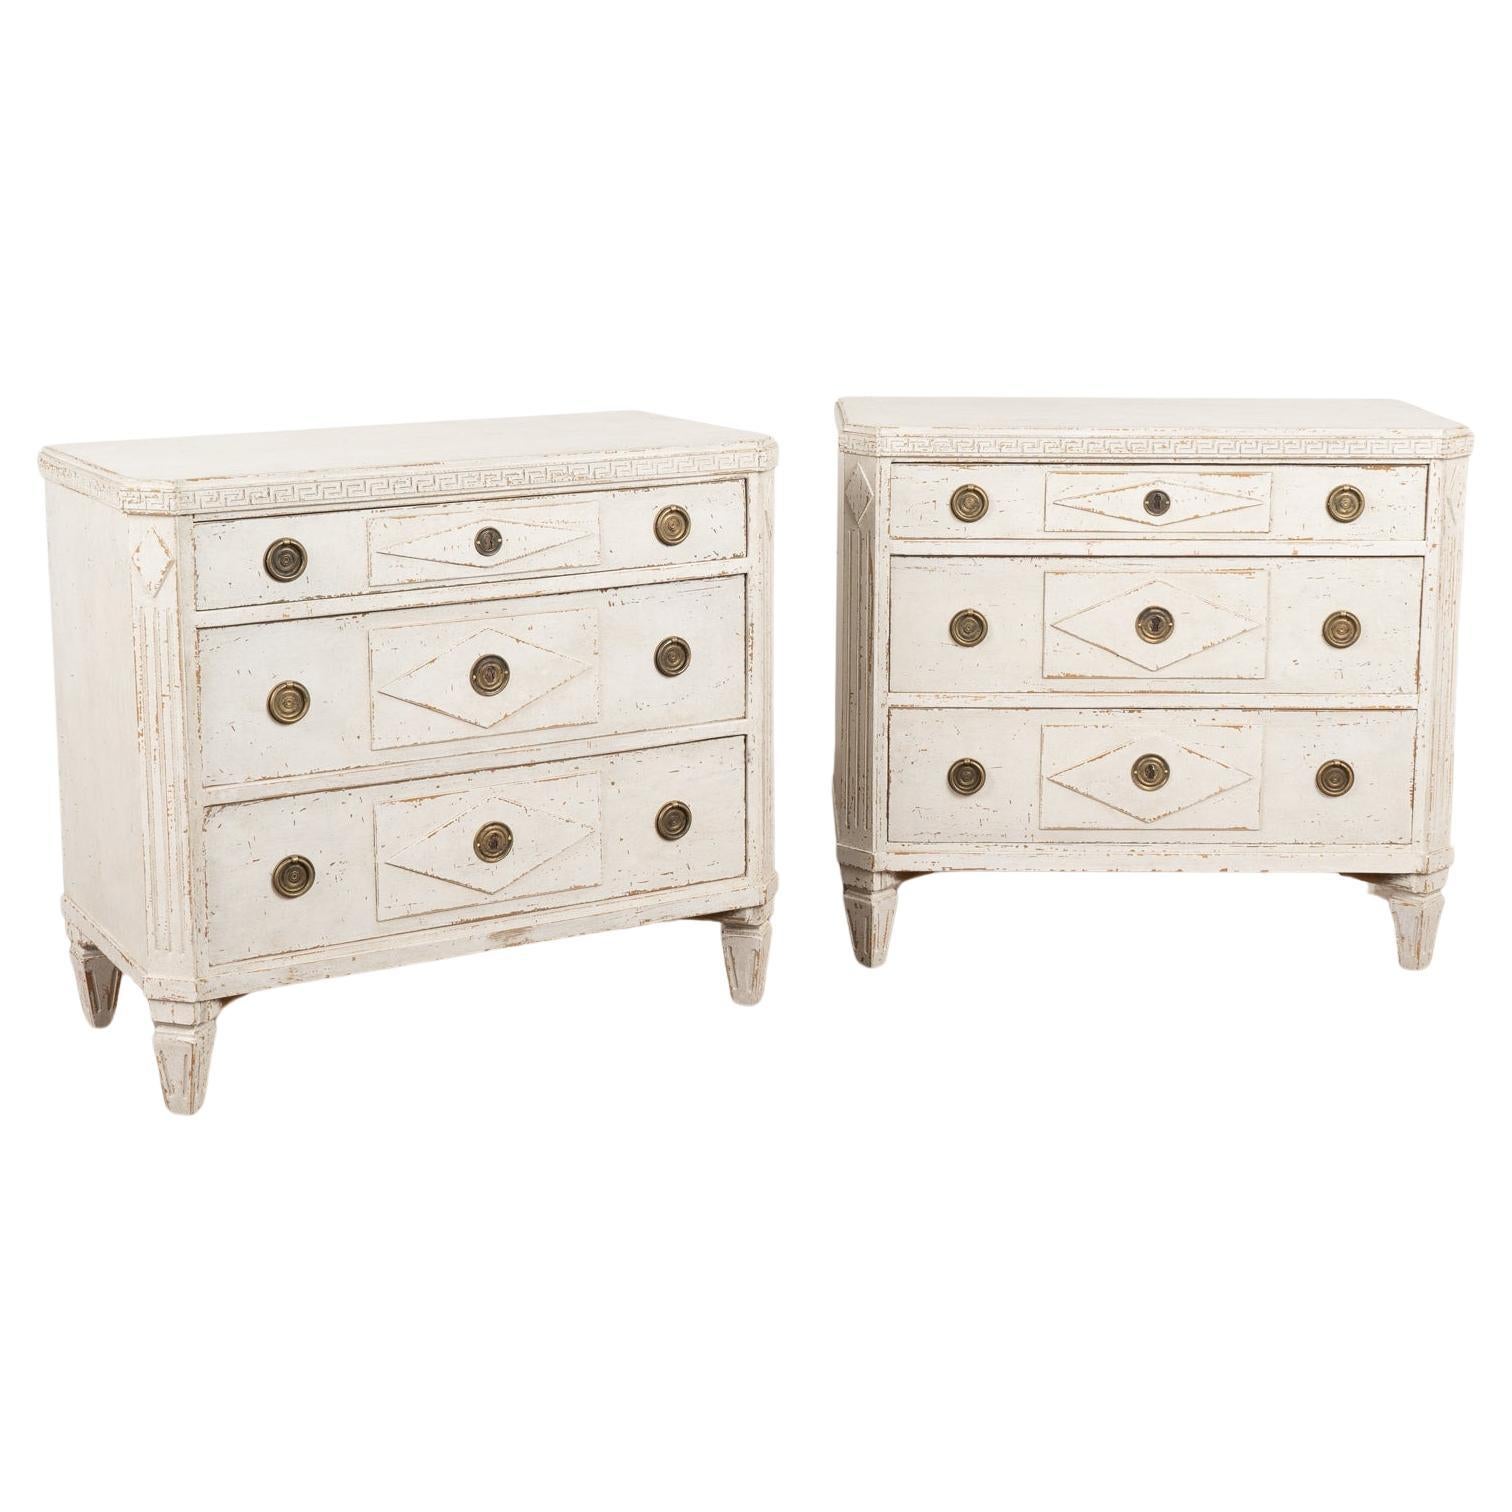 Pair, Gustavian White Painted Chest of Drawers, Sweden circa 1860-80